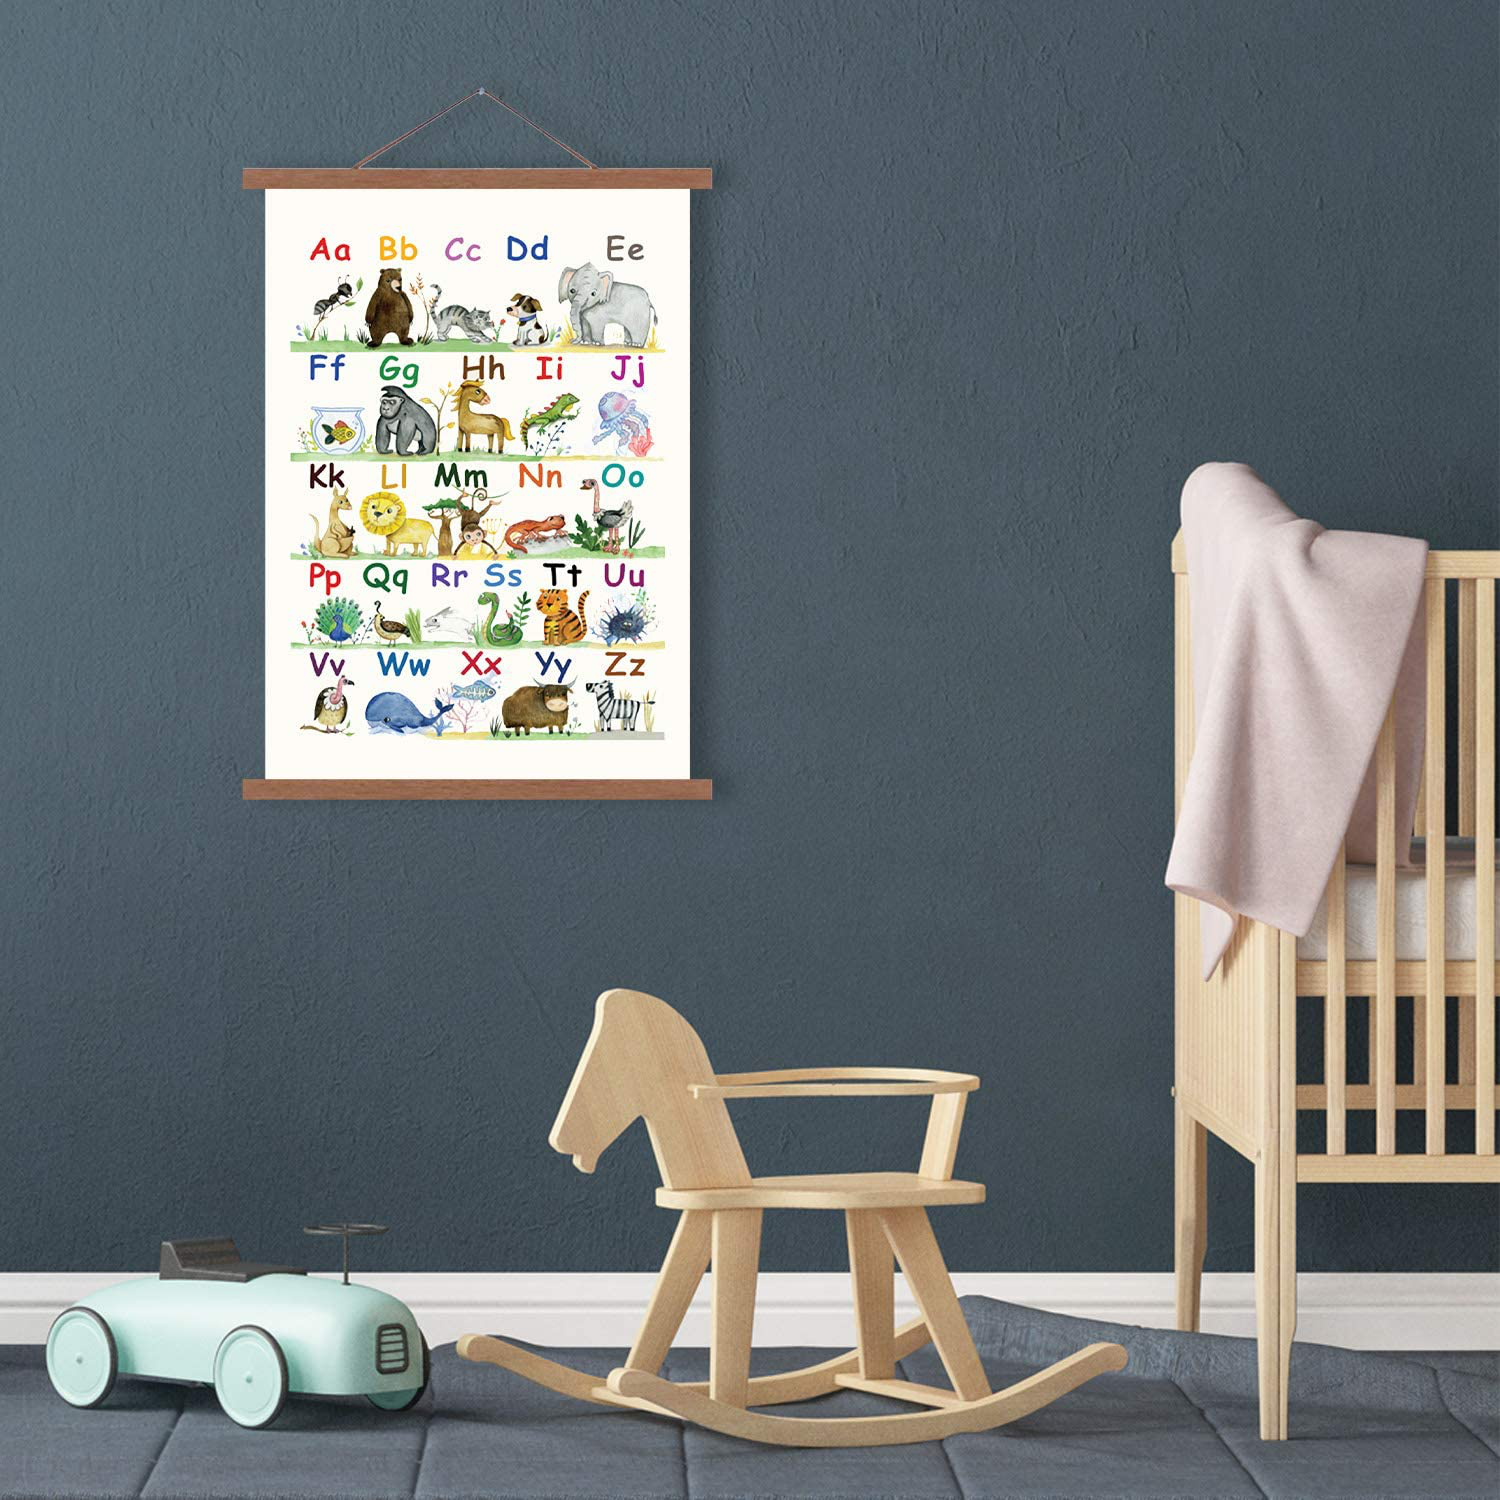 Alphabet Poster for Classroom Decor | ABC Poster for Toddlers Wall Playroom & Nursery Decor | Canvas Wall Art - 15x21 | Kids Alphabet Chart Wall Hanging for Boys & Girls Room Decor